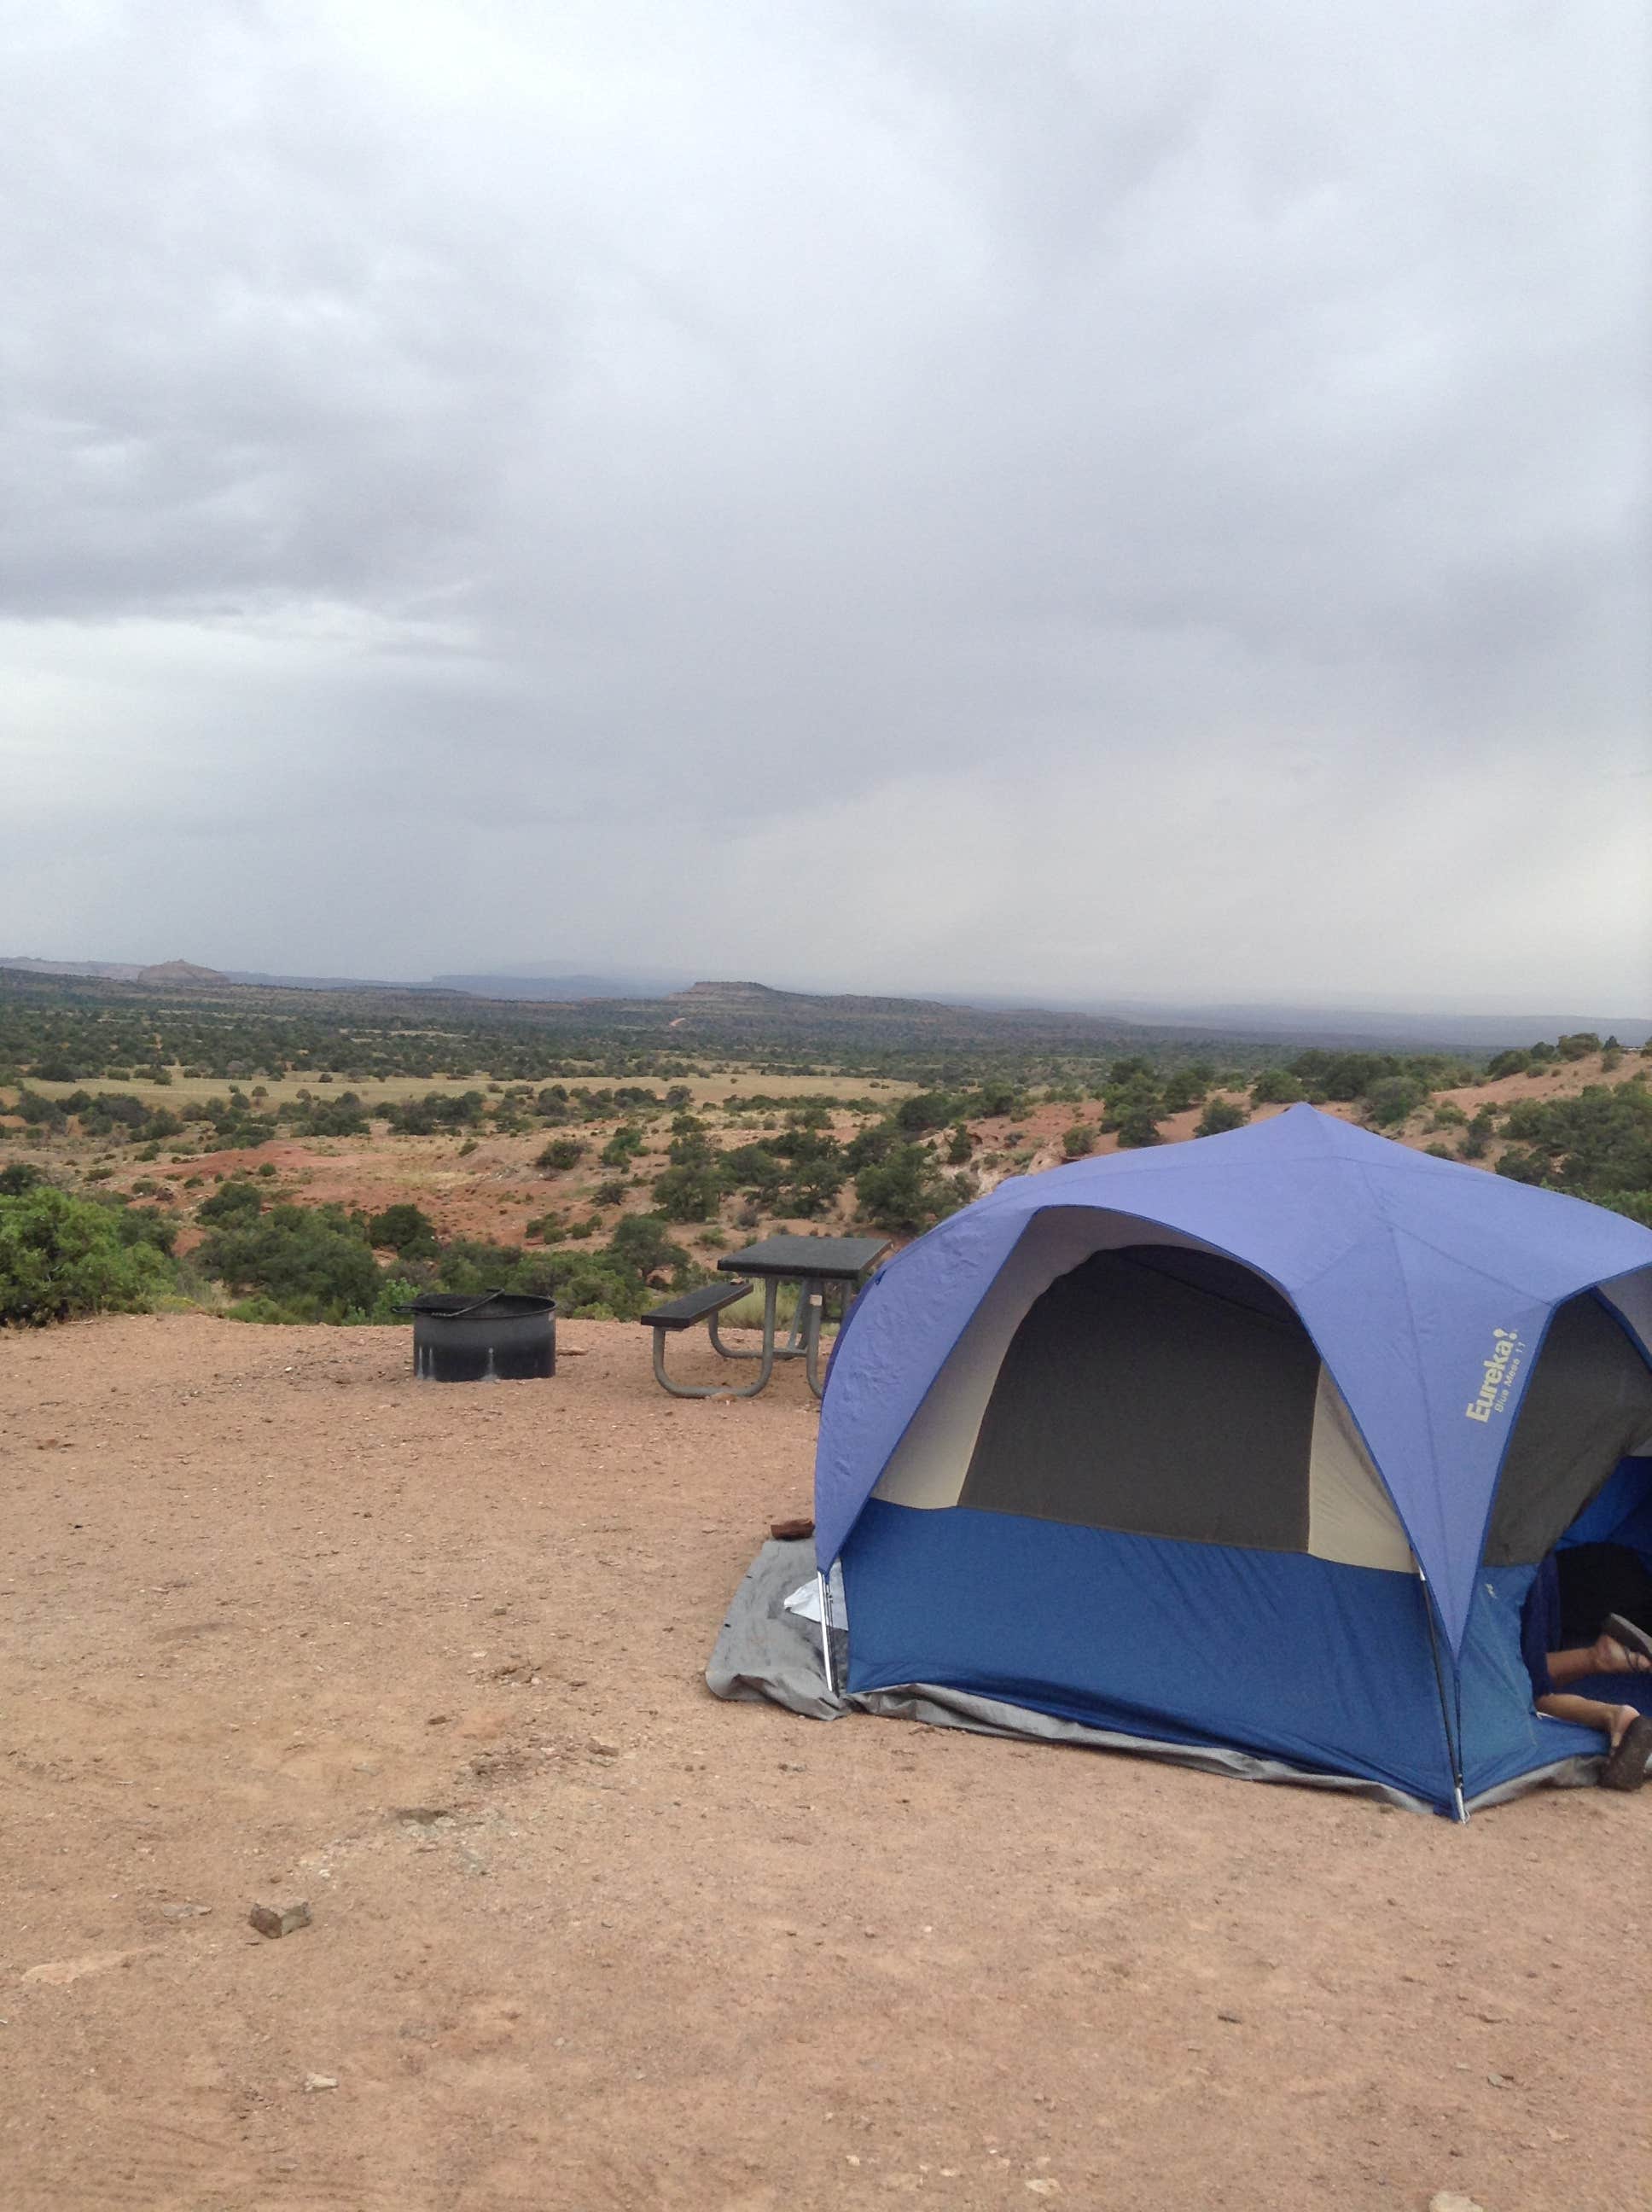 Camper submitted image from Cowboy Camp Campground - 4